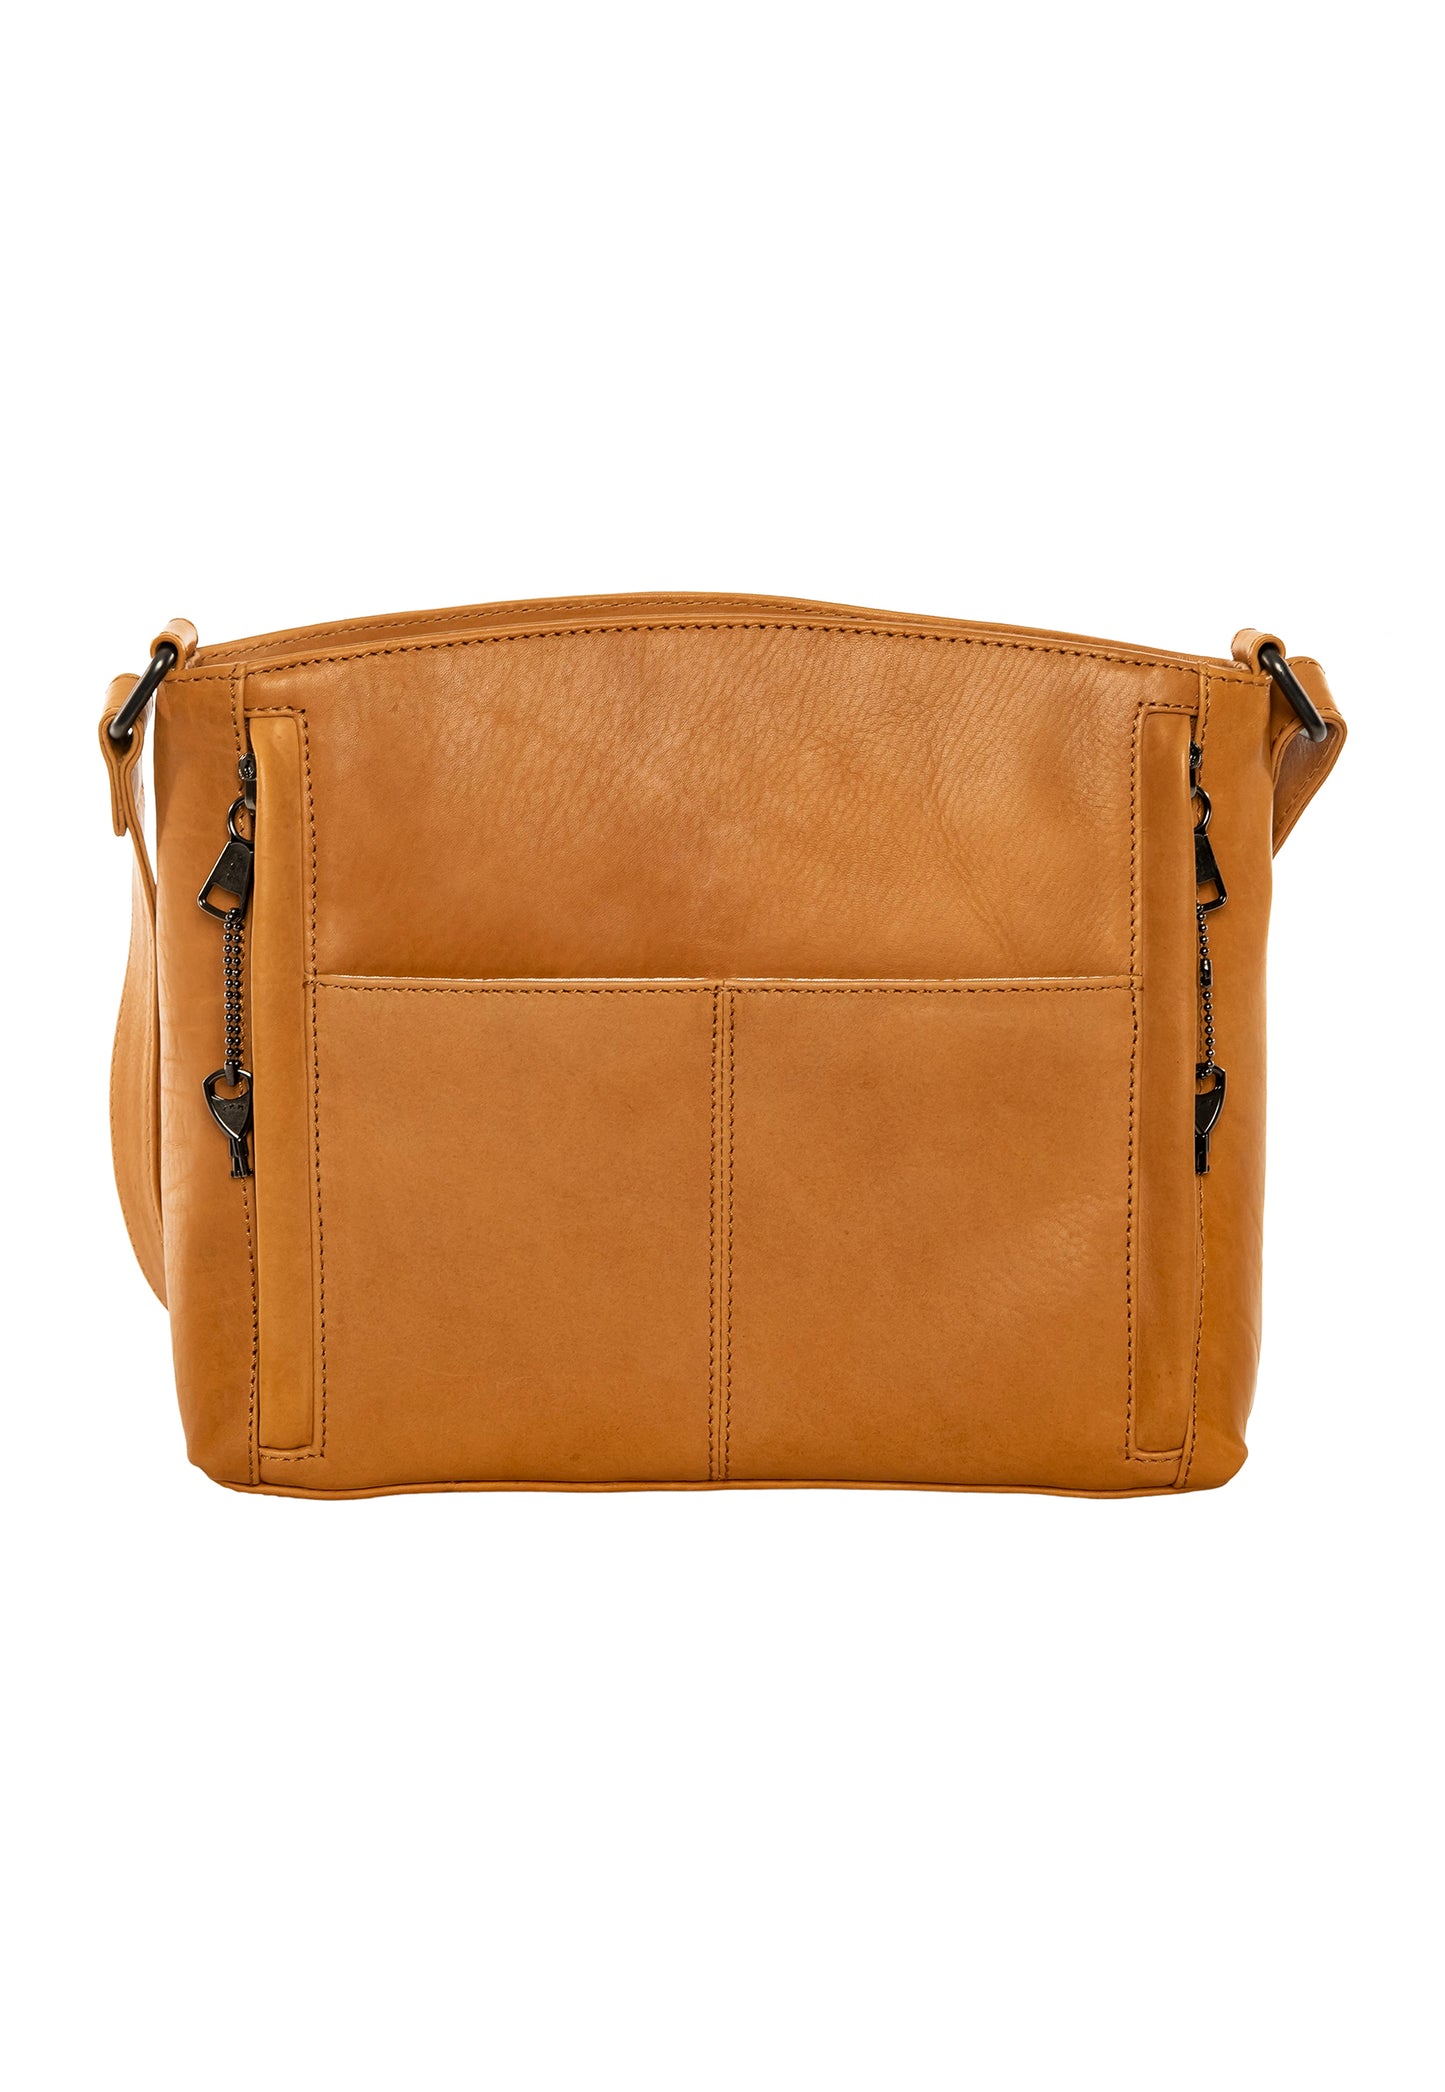 leather conceal carry purse side view